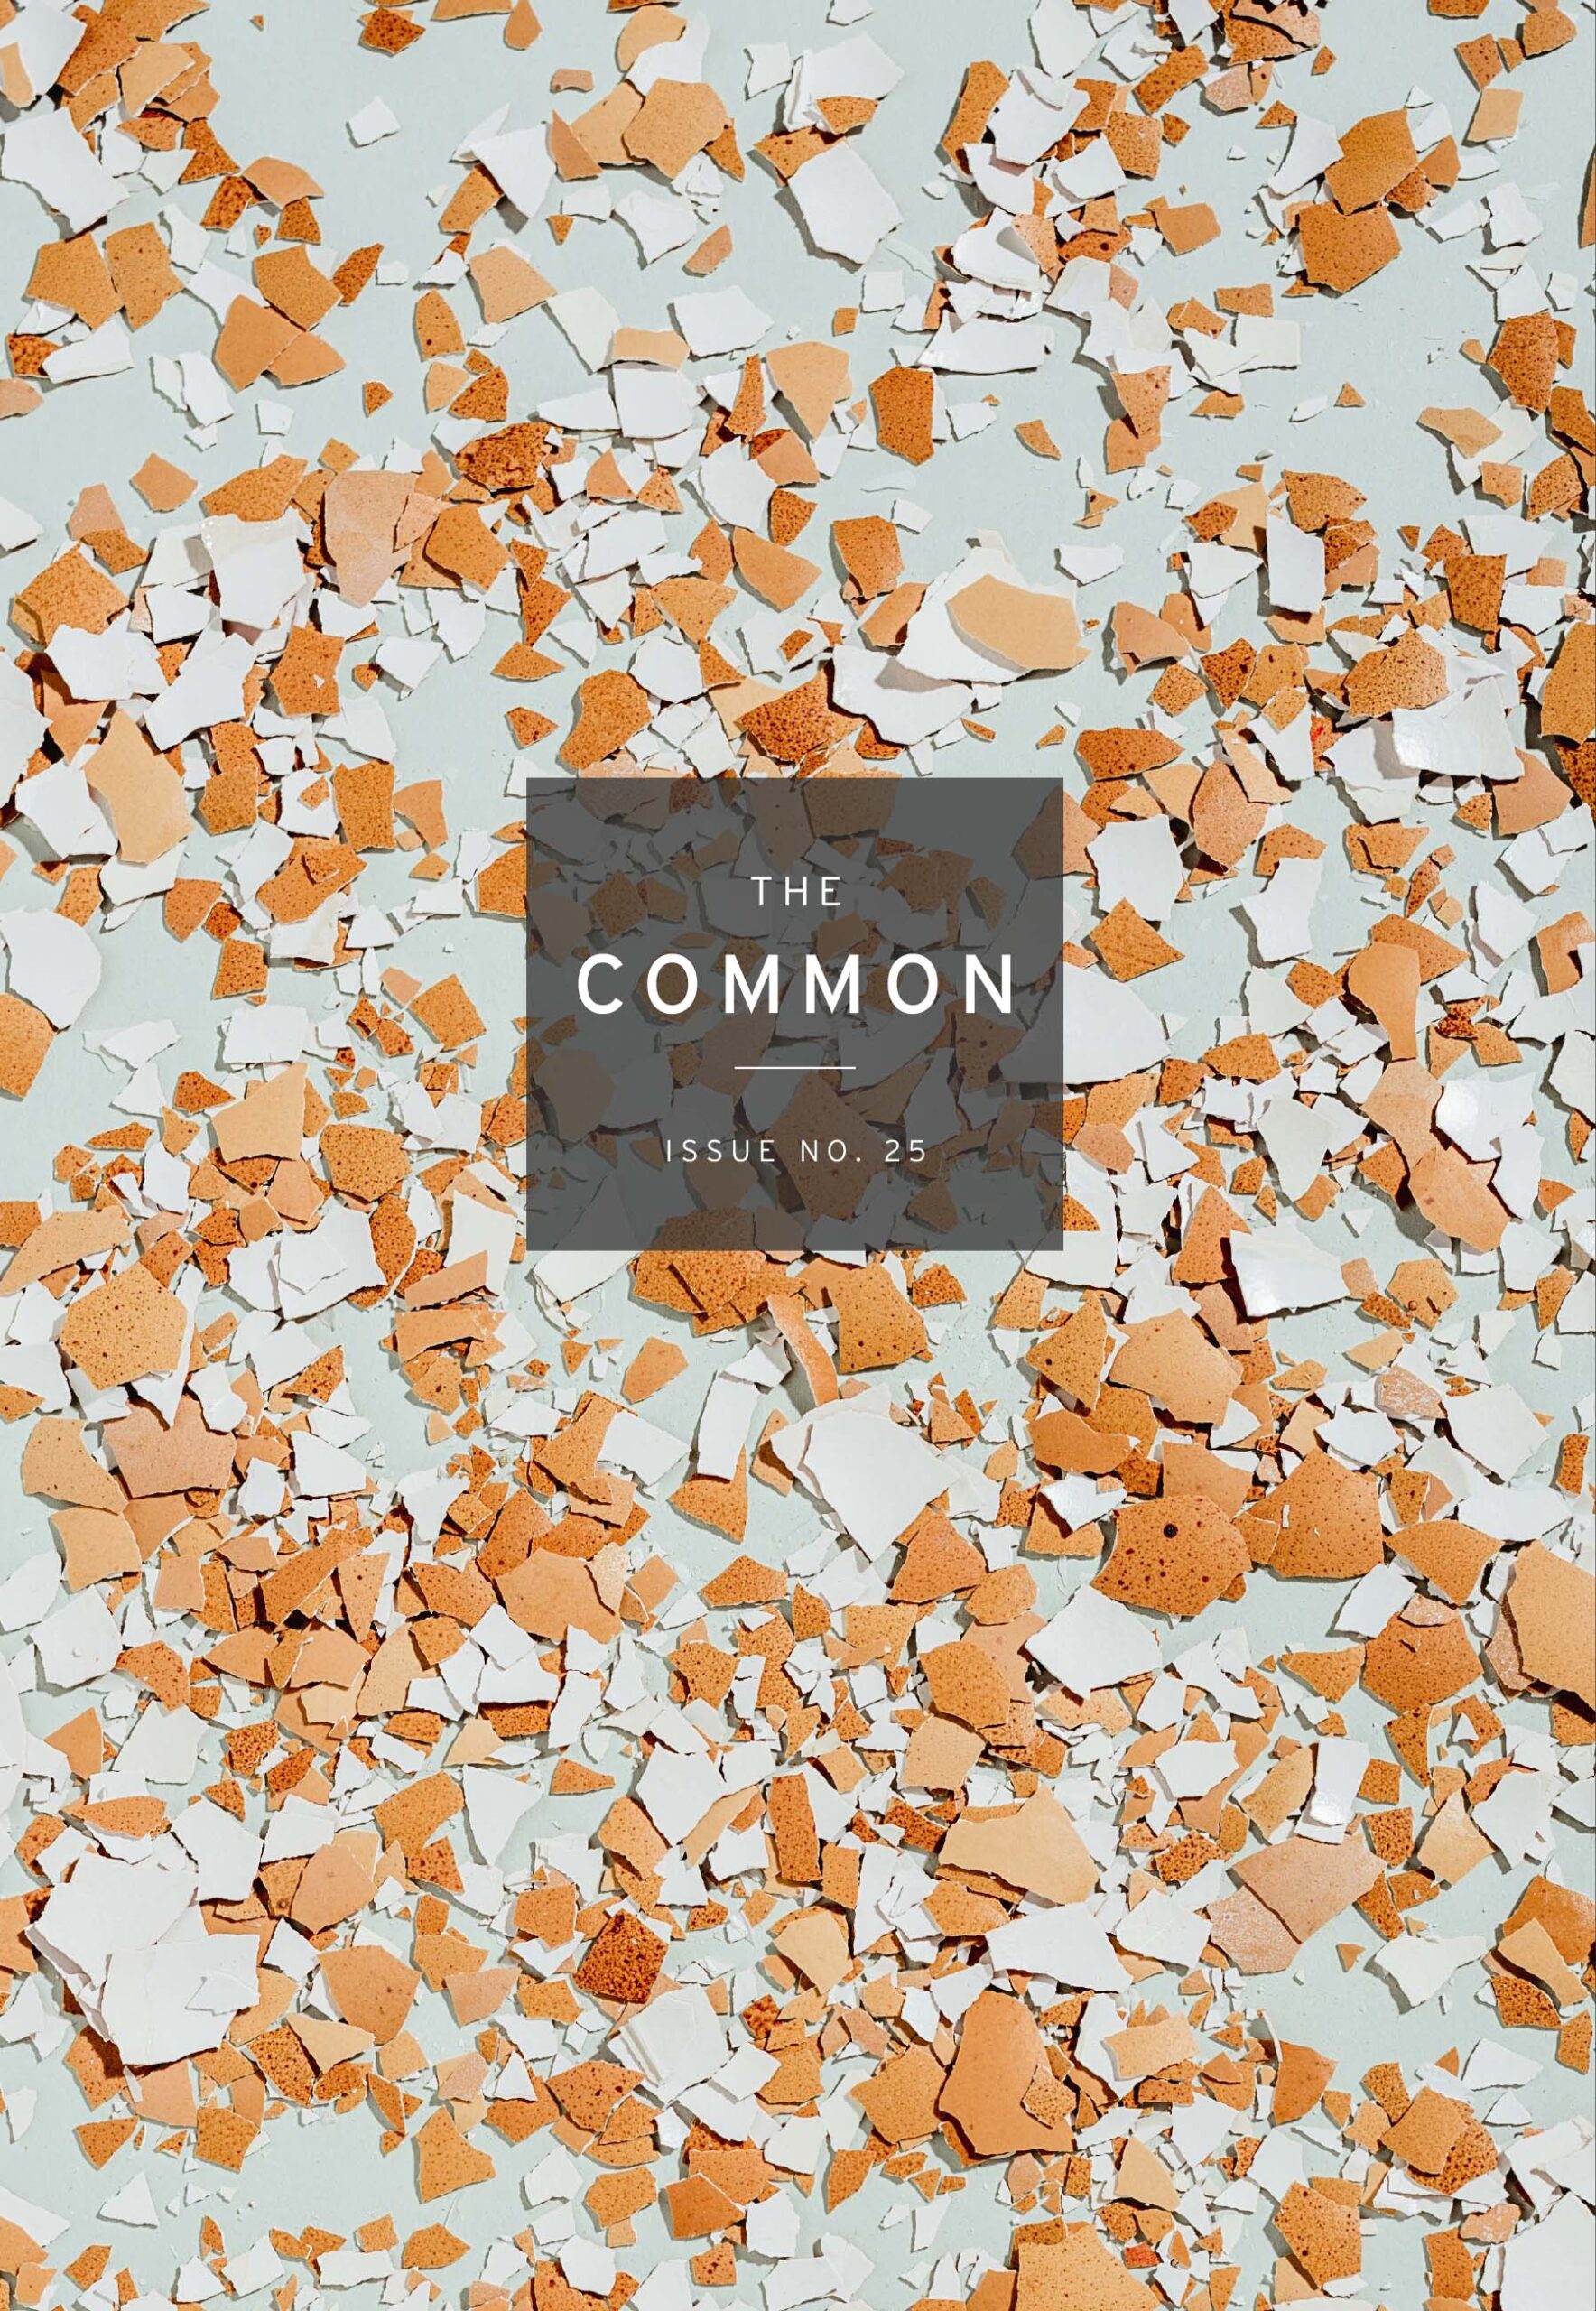 Issue 25 of The Common is Here!